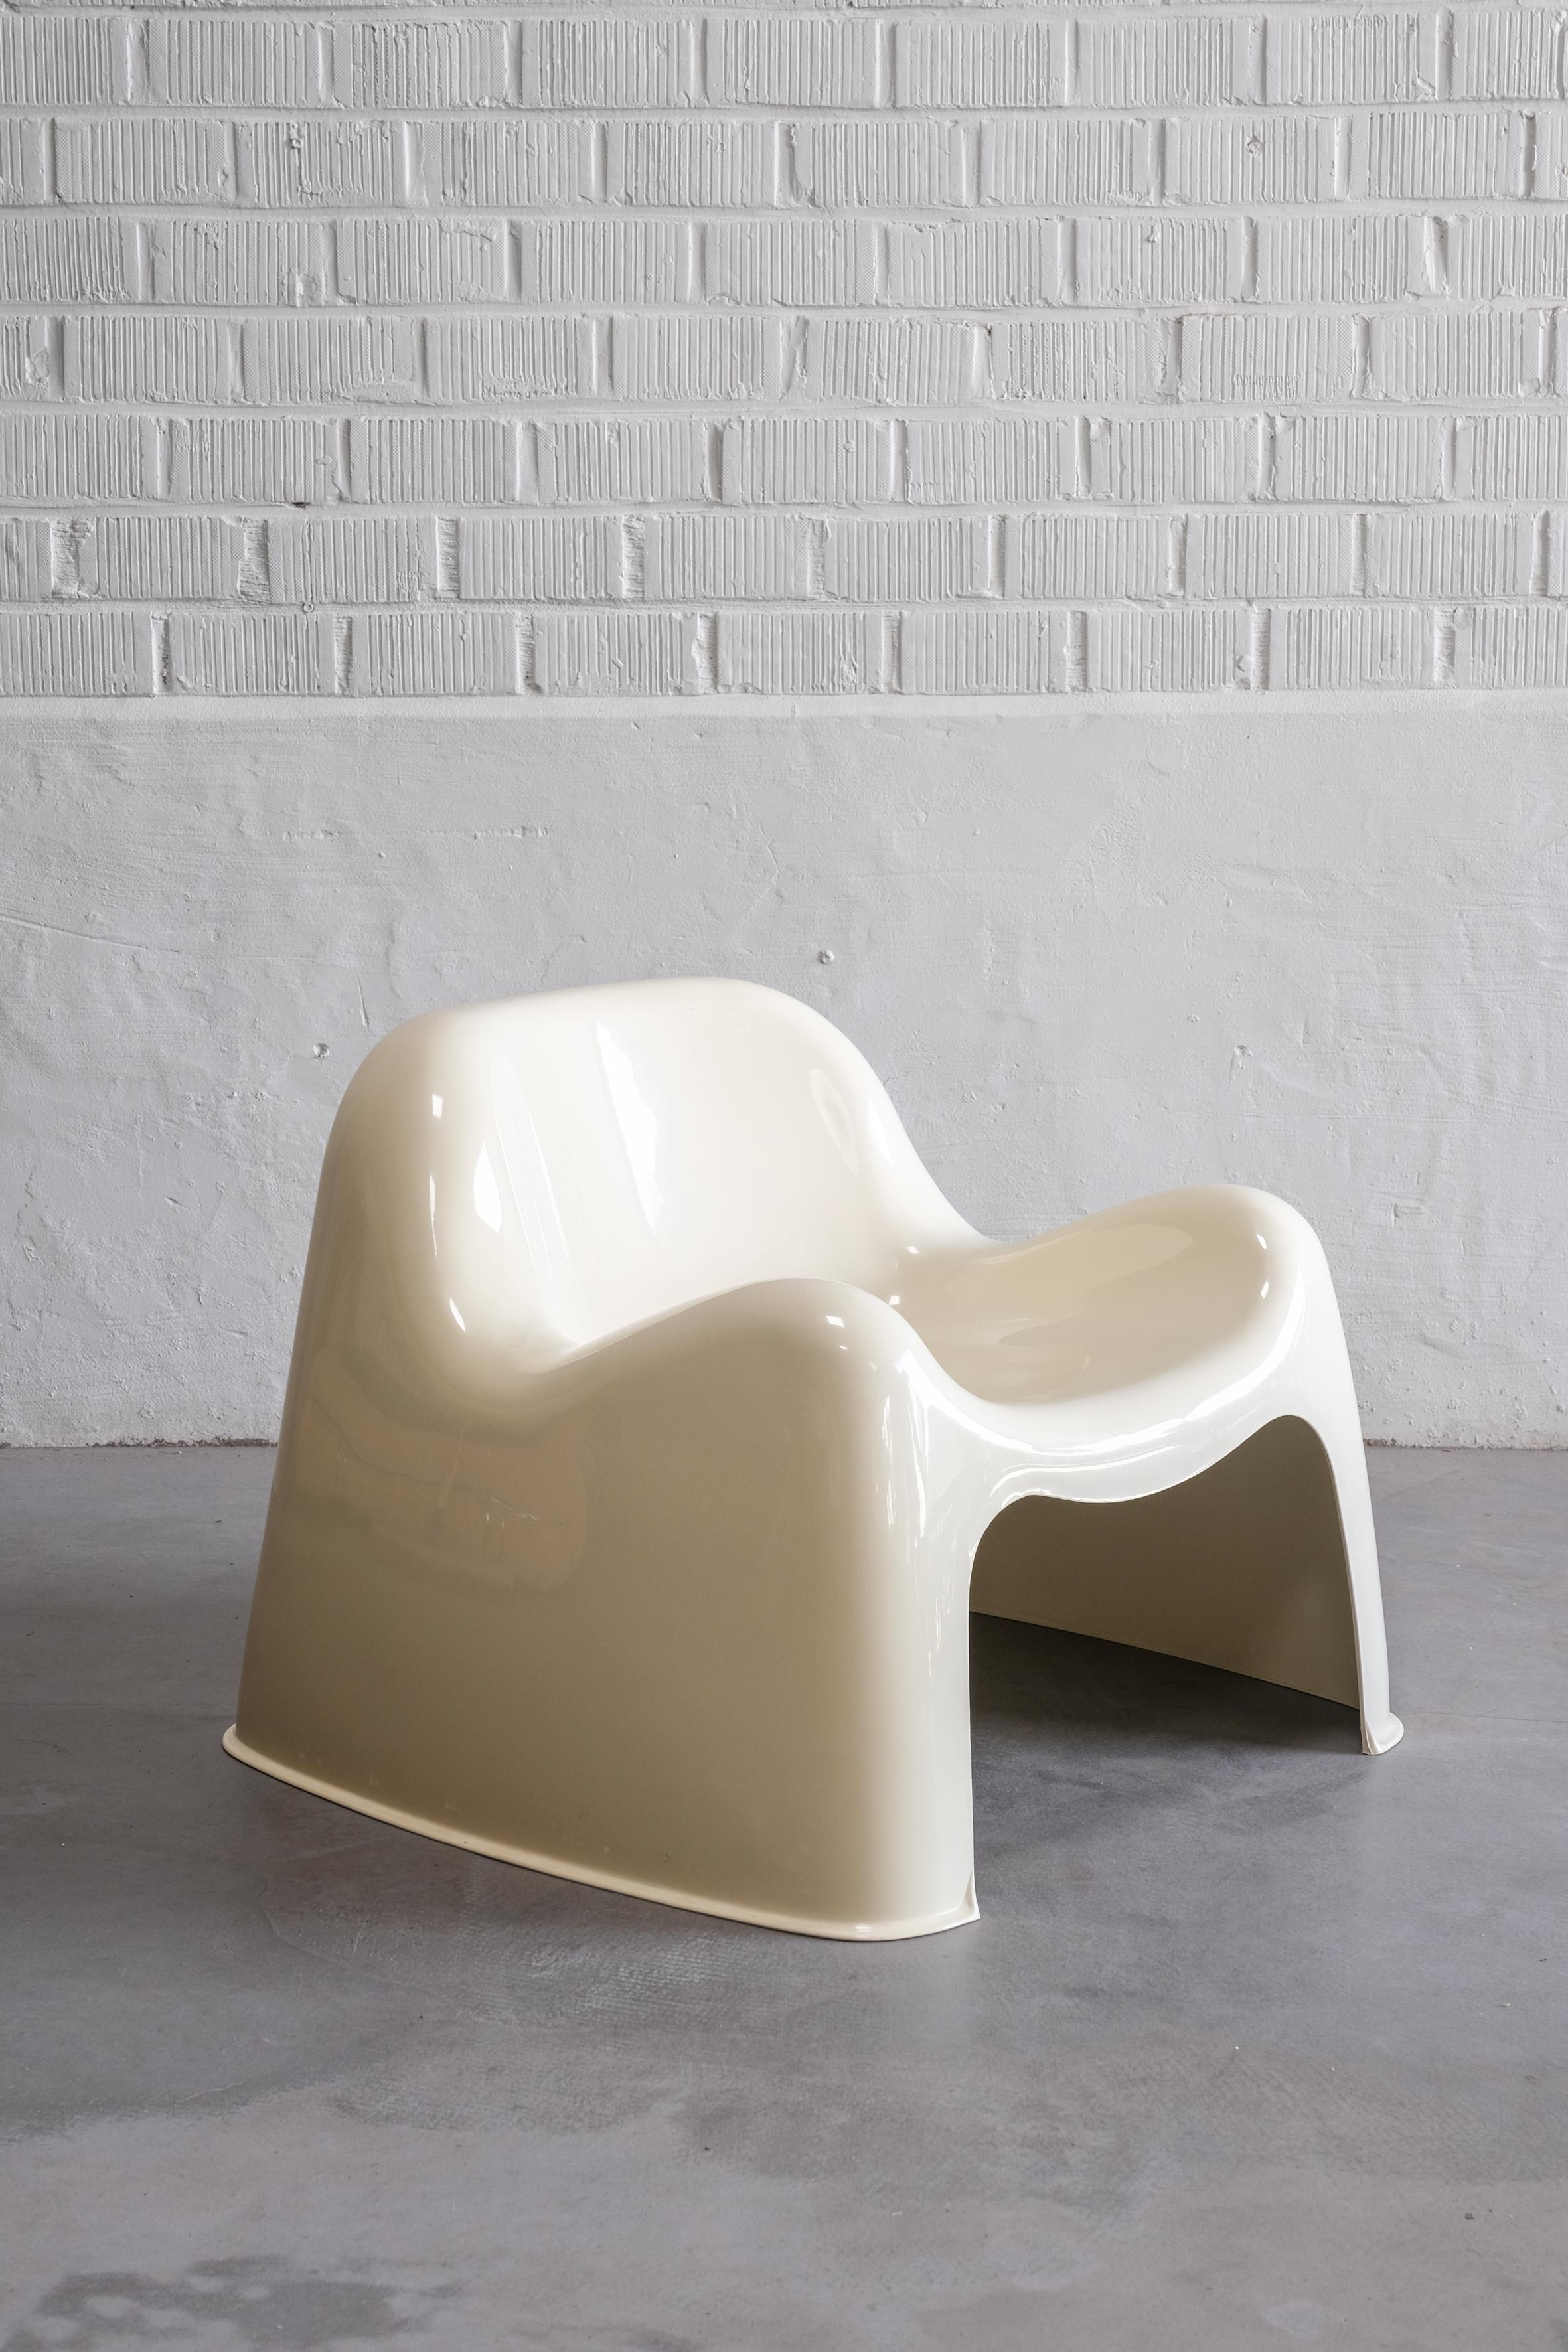 Toga chair designed by Sergio Mazza for Artemide in the 1960s.
Chair can be used as an indoor lounge chair or as an outdoor lounge chair. 

The 3 pieces are stackable.